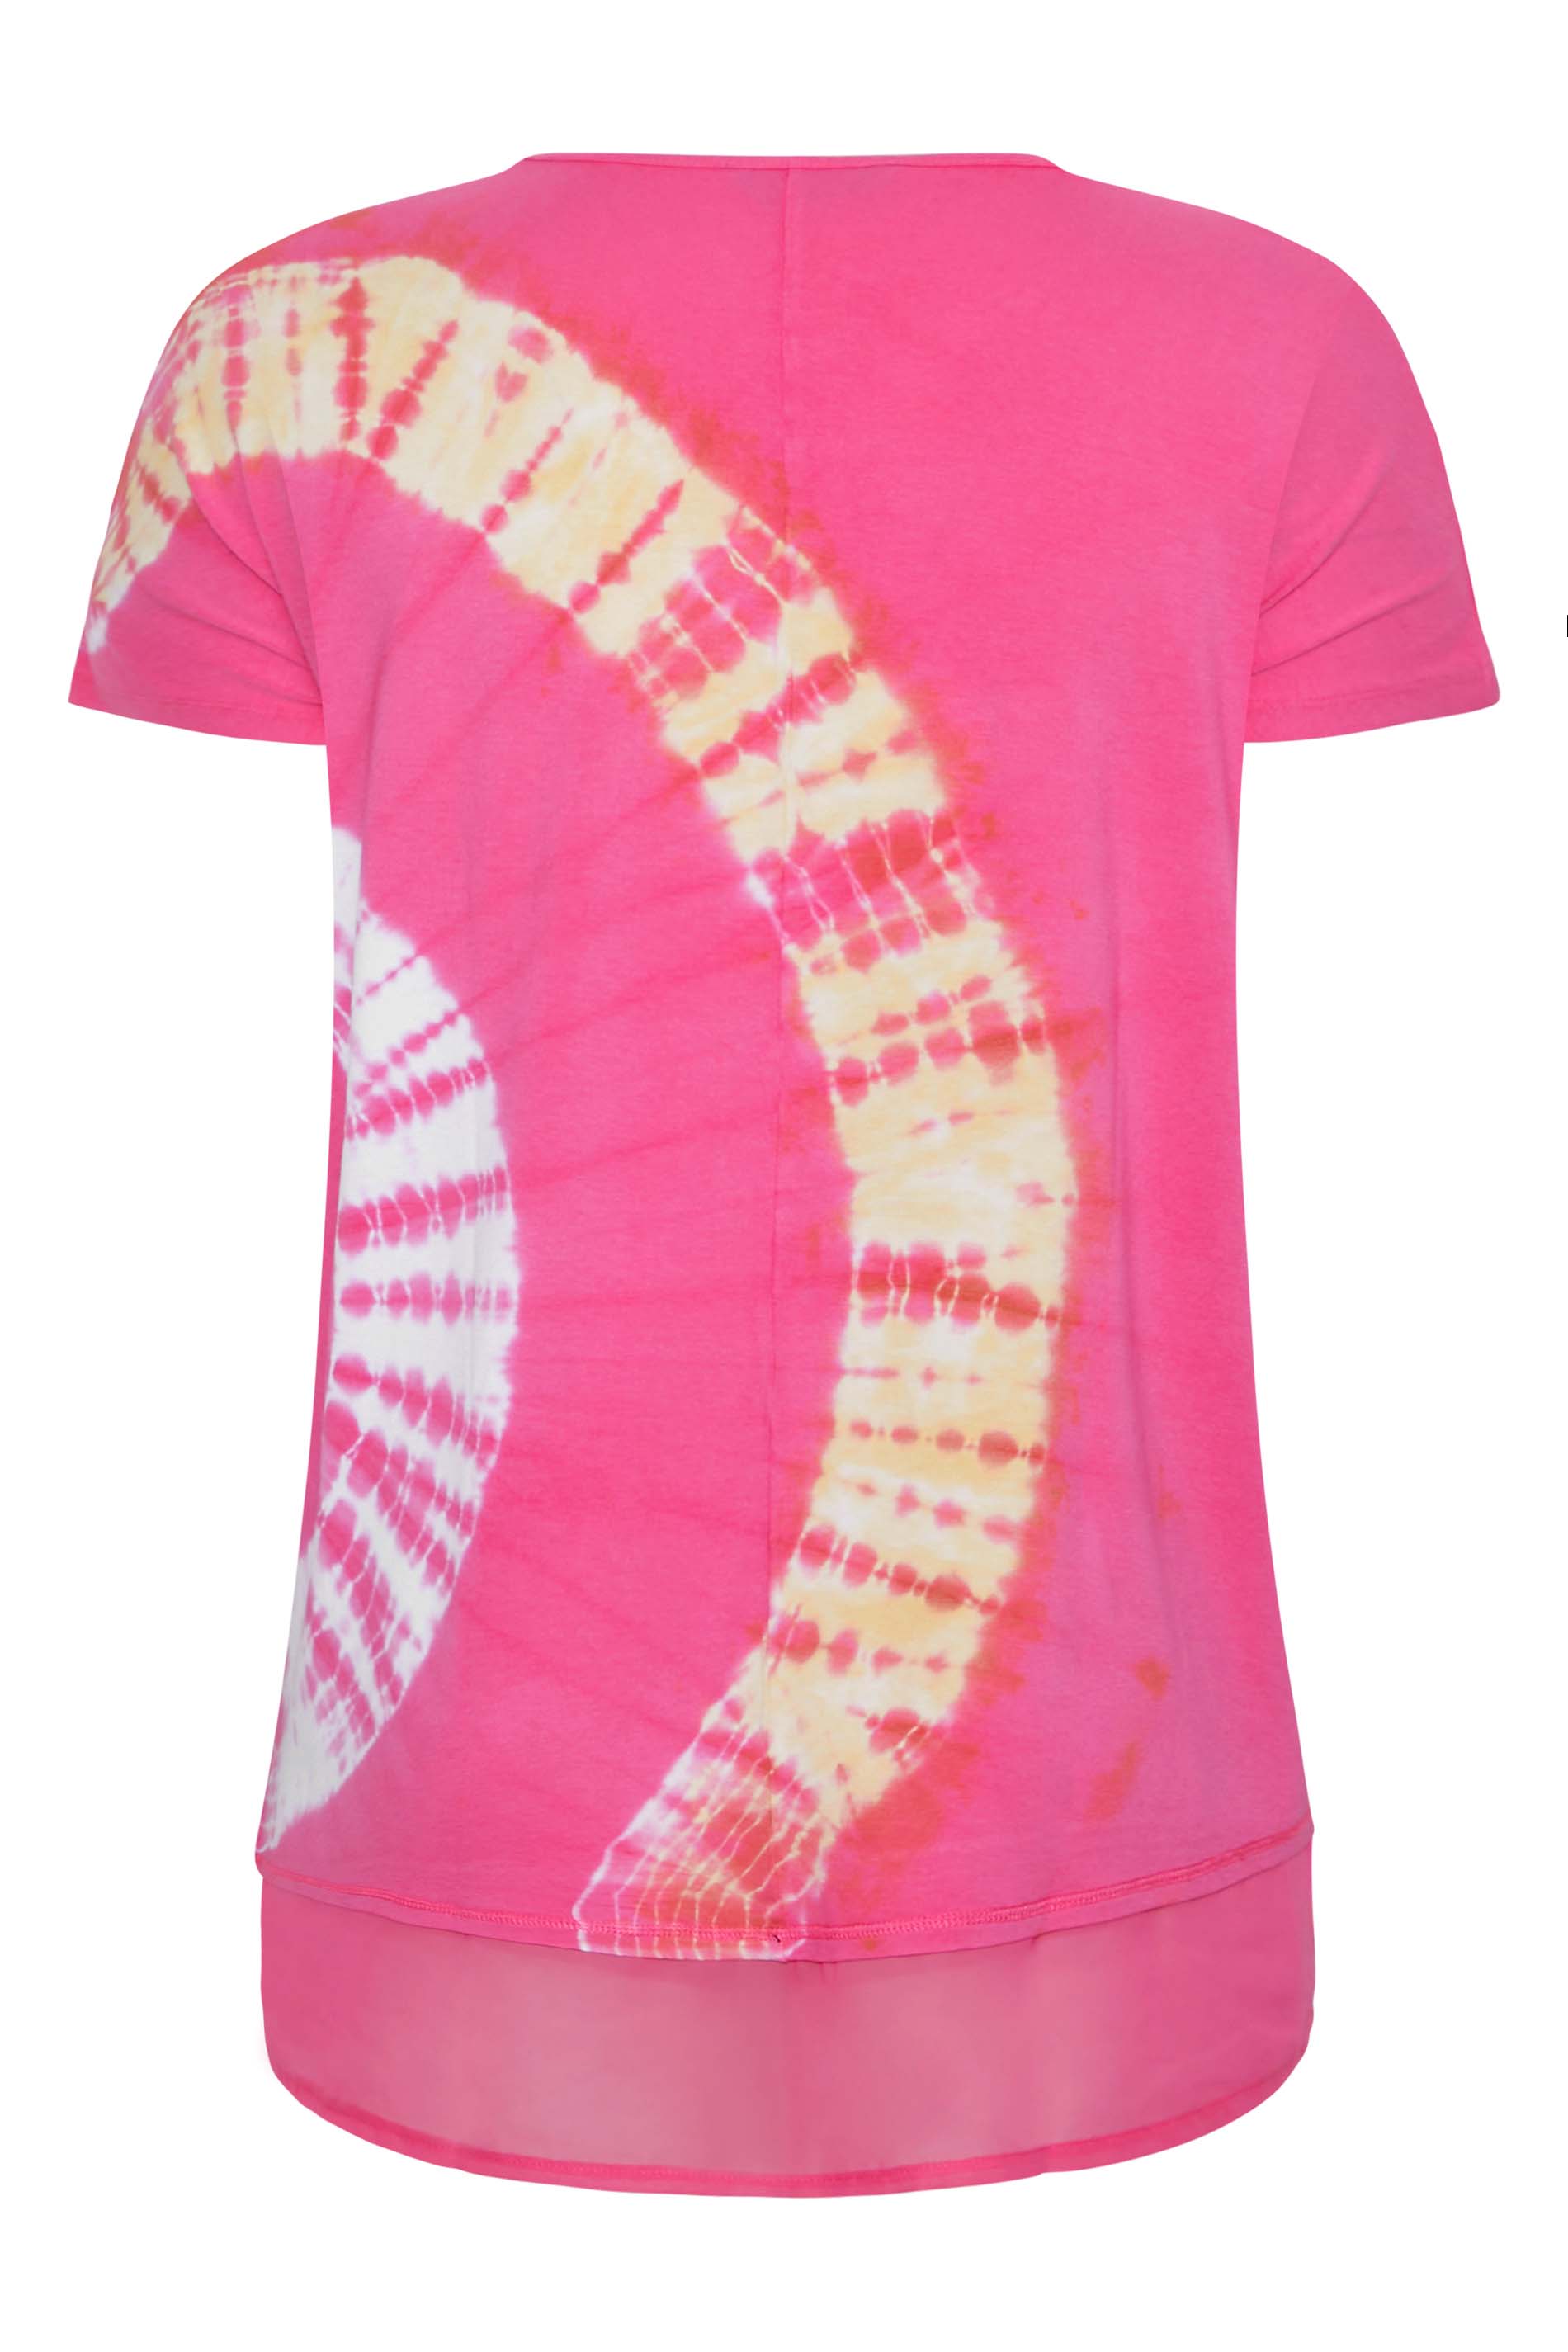 Grande taille  Tops Grande taille  Tops Casual | T-Shirt Rose Tie & Dye Jaune & Blanc - GW48466